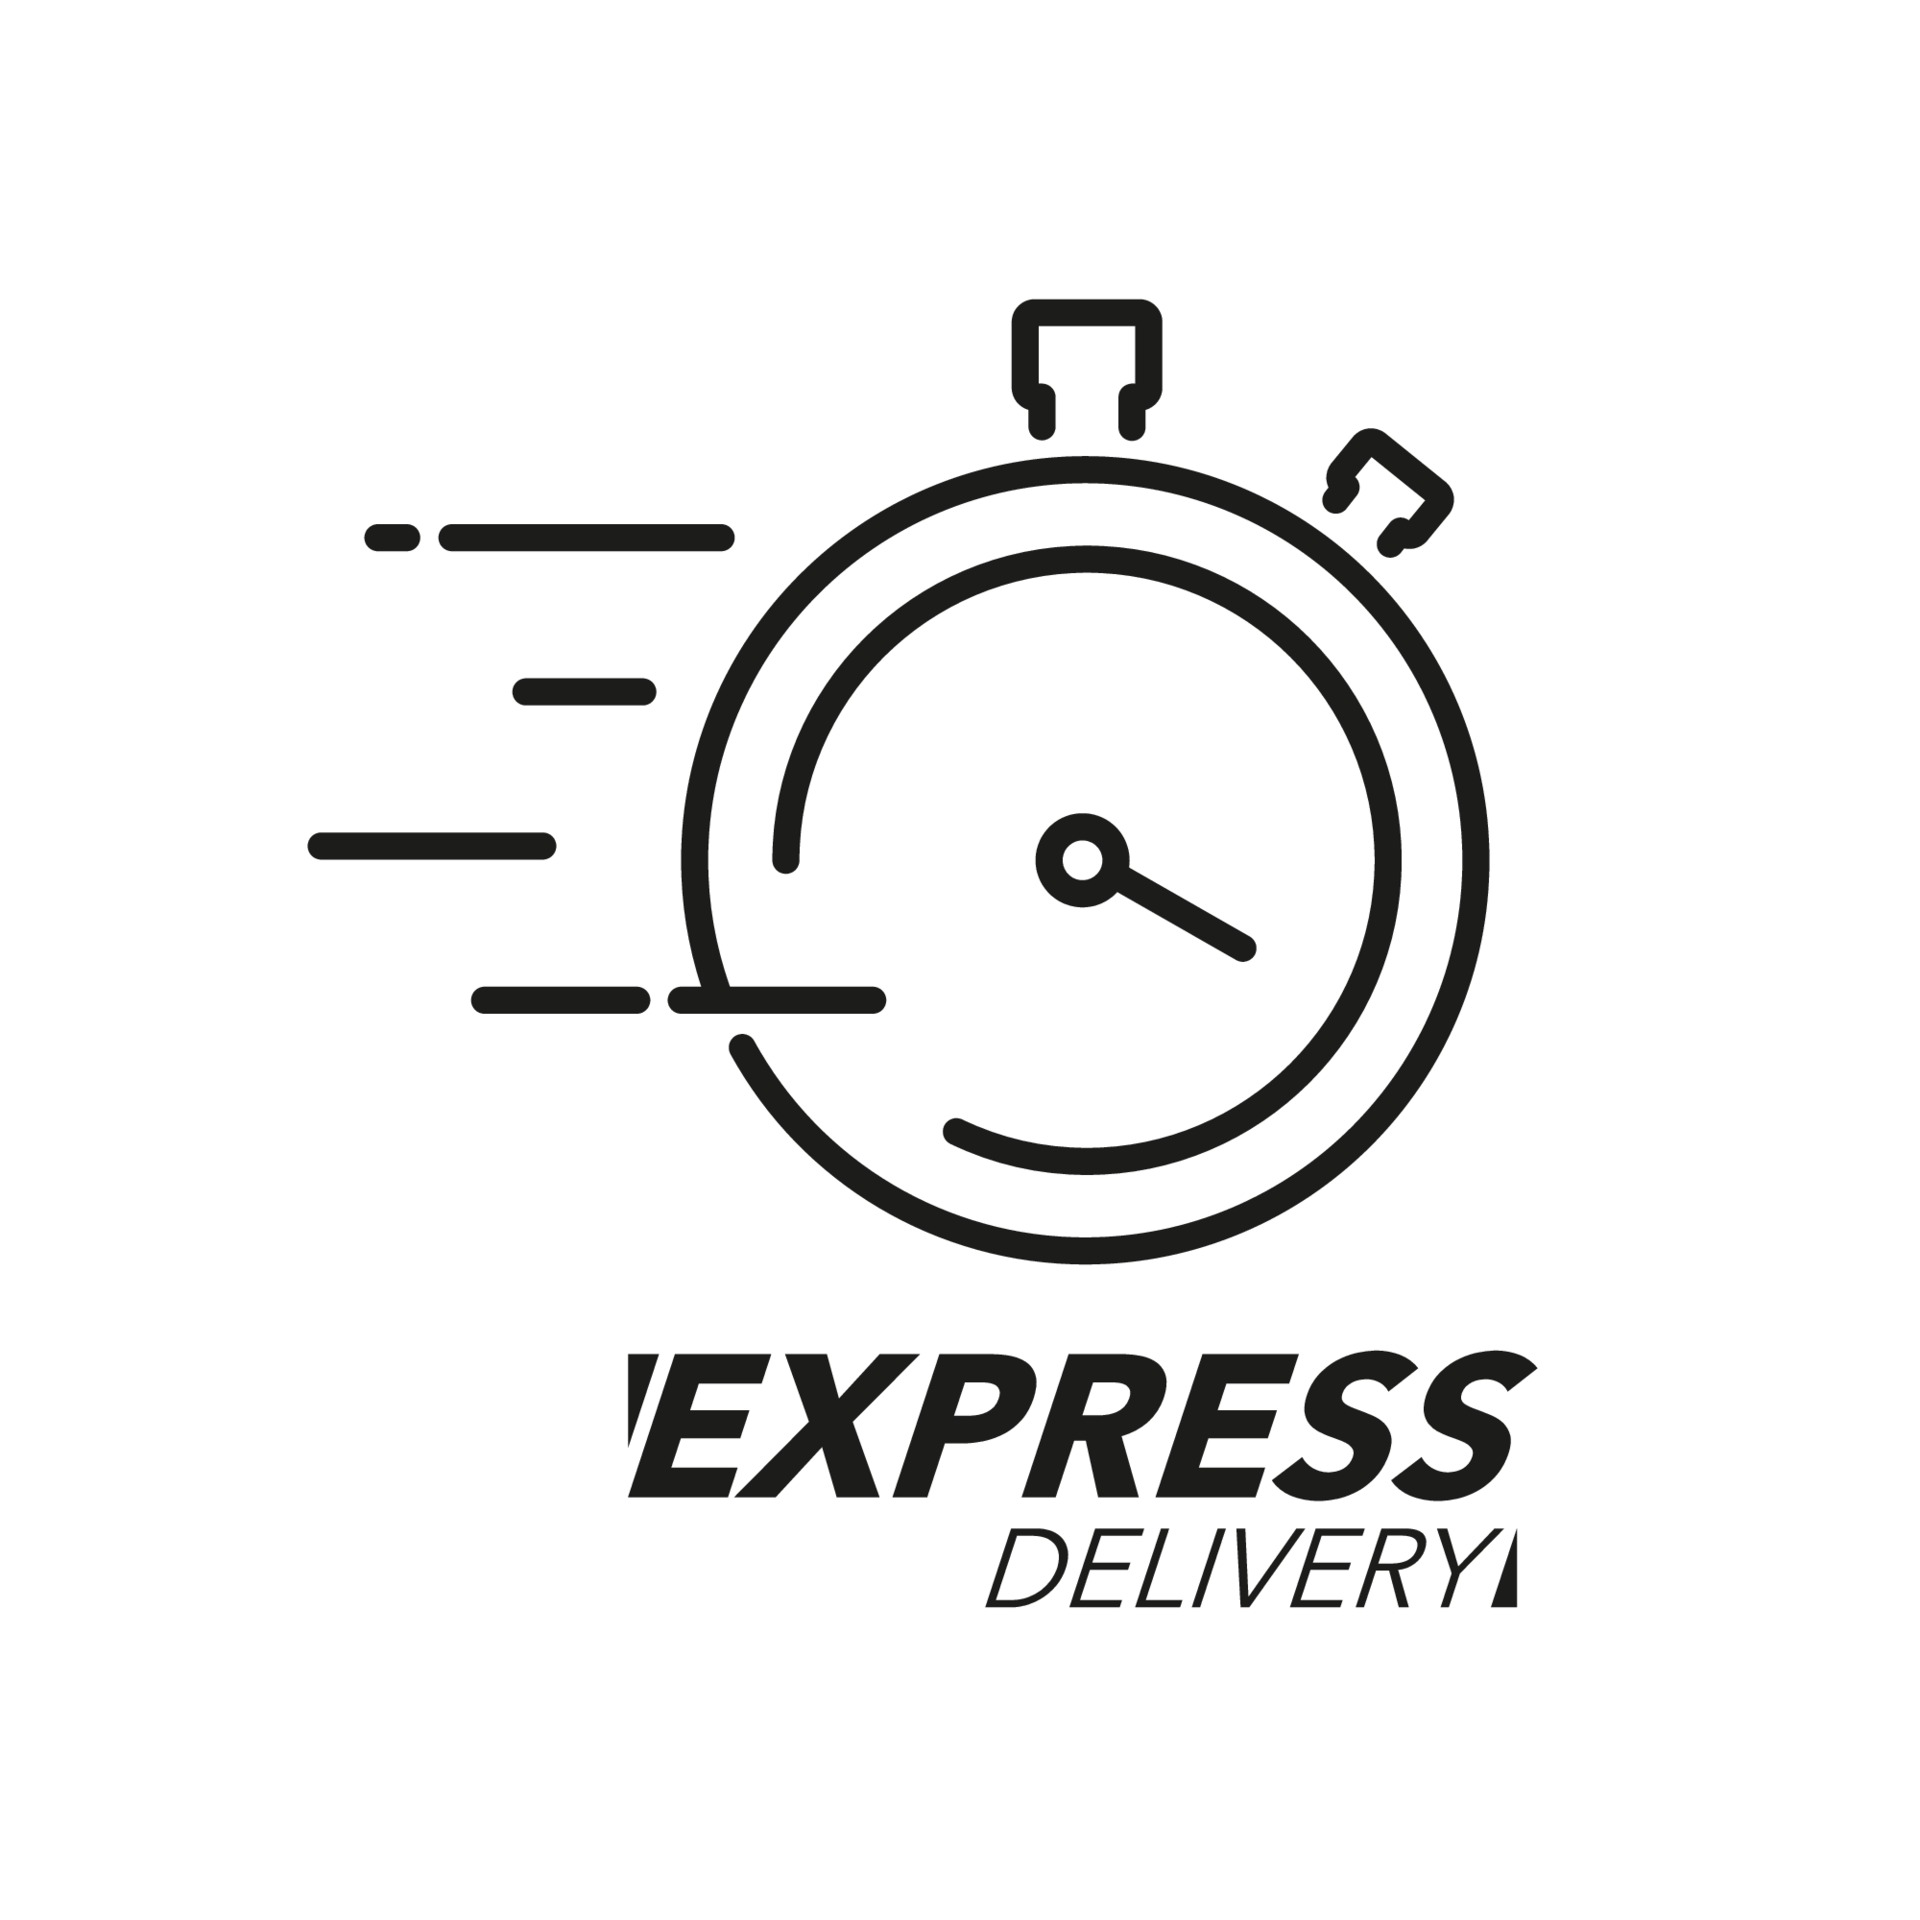 https://static.vecteezy.com/system/resources/previews/001/963/419/original/express-delivery-icon-concept-stop-watch-icon-for-service-order-fast-and-worldwide-shipping-vector.jpg